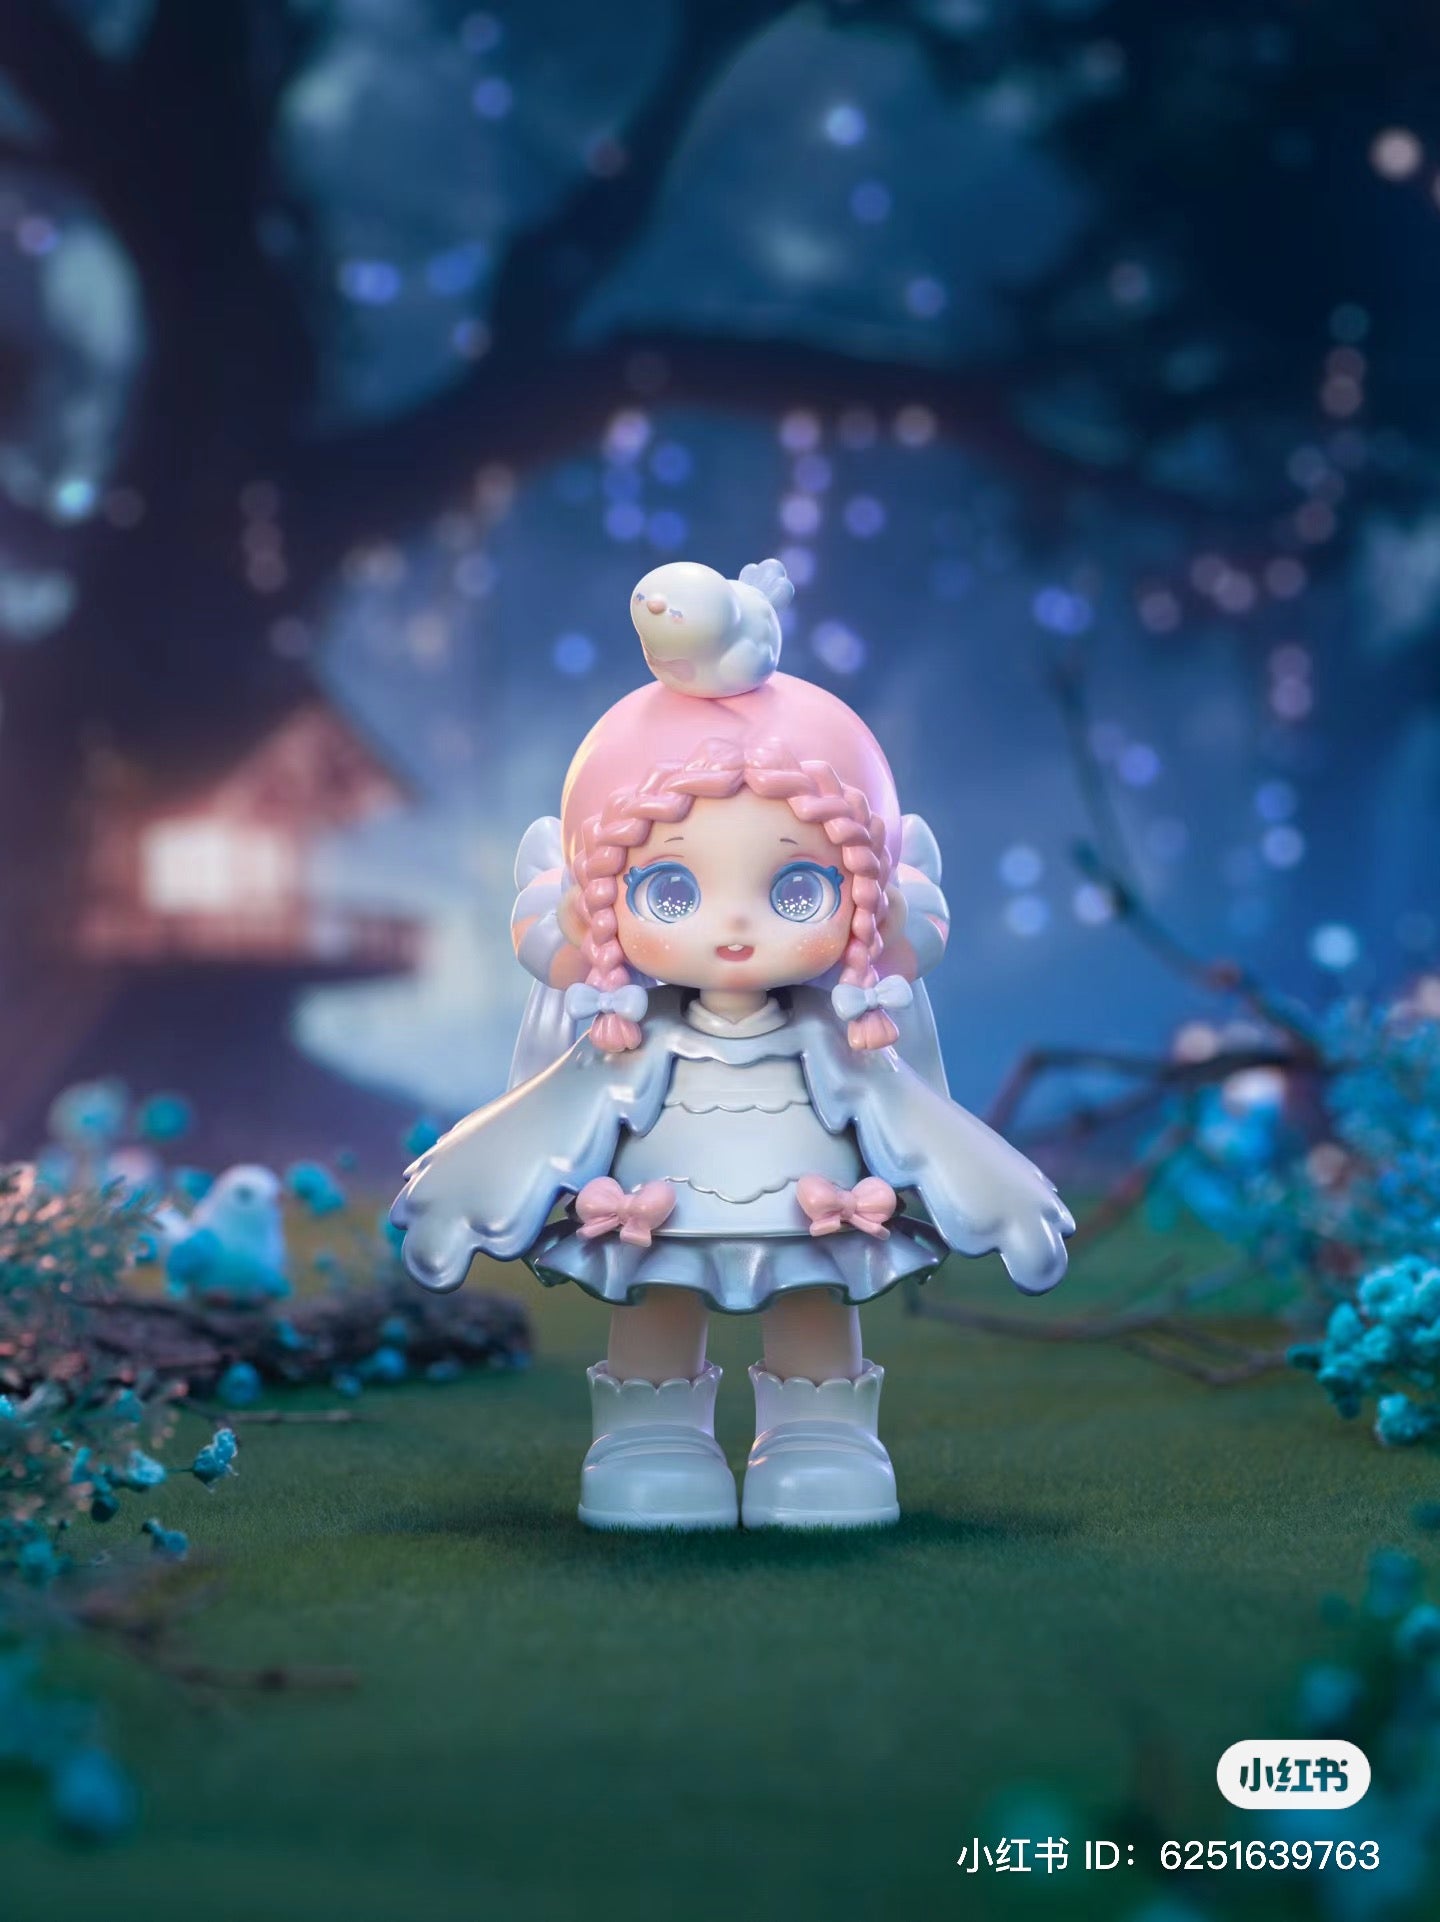 Alt text: A toy doll named Miana with pink hair and a bird on her head from the Tea Party In The Forest Blind Box Series.